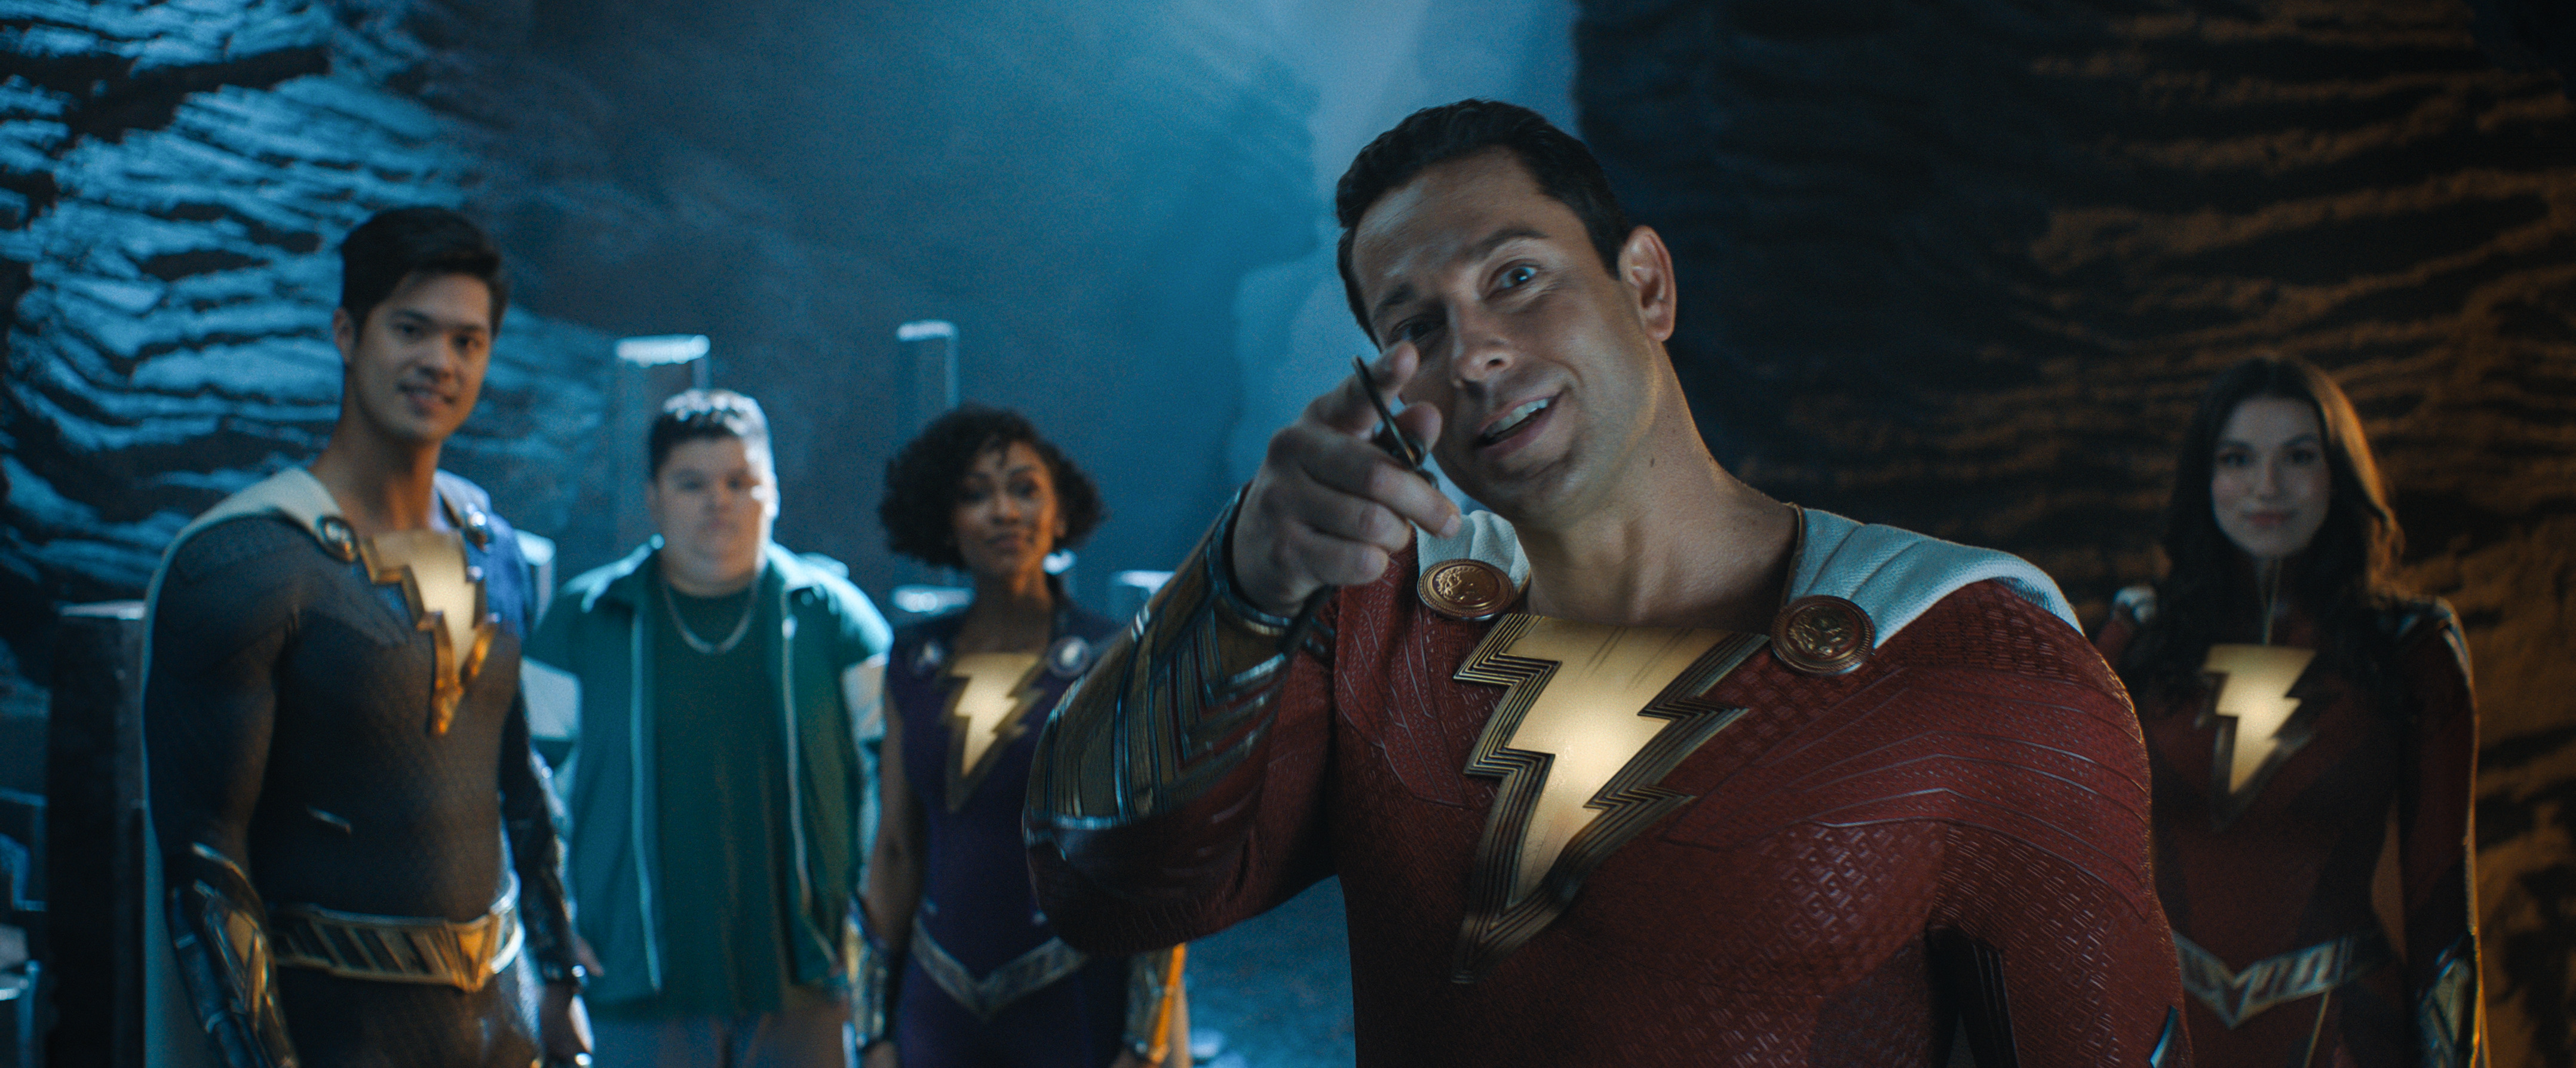 Watch the trailer for Shazam! Fury of the Gods here